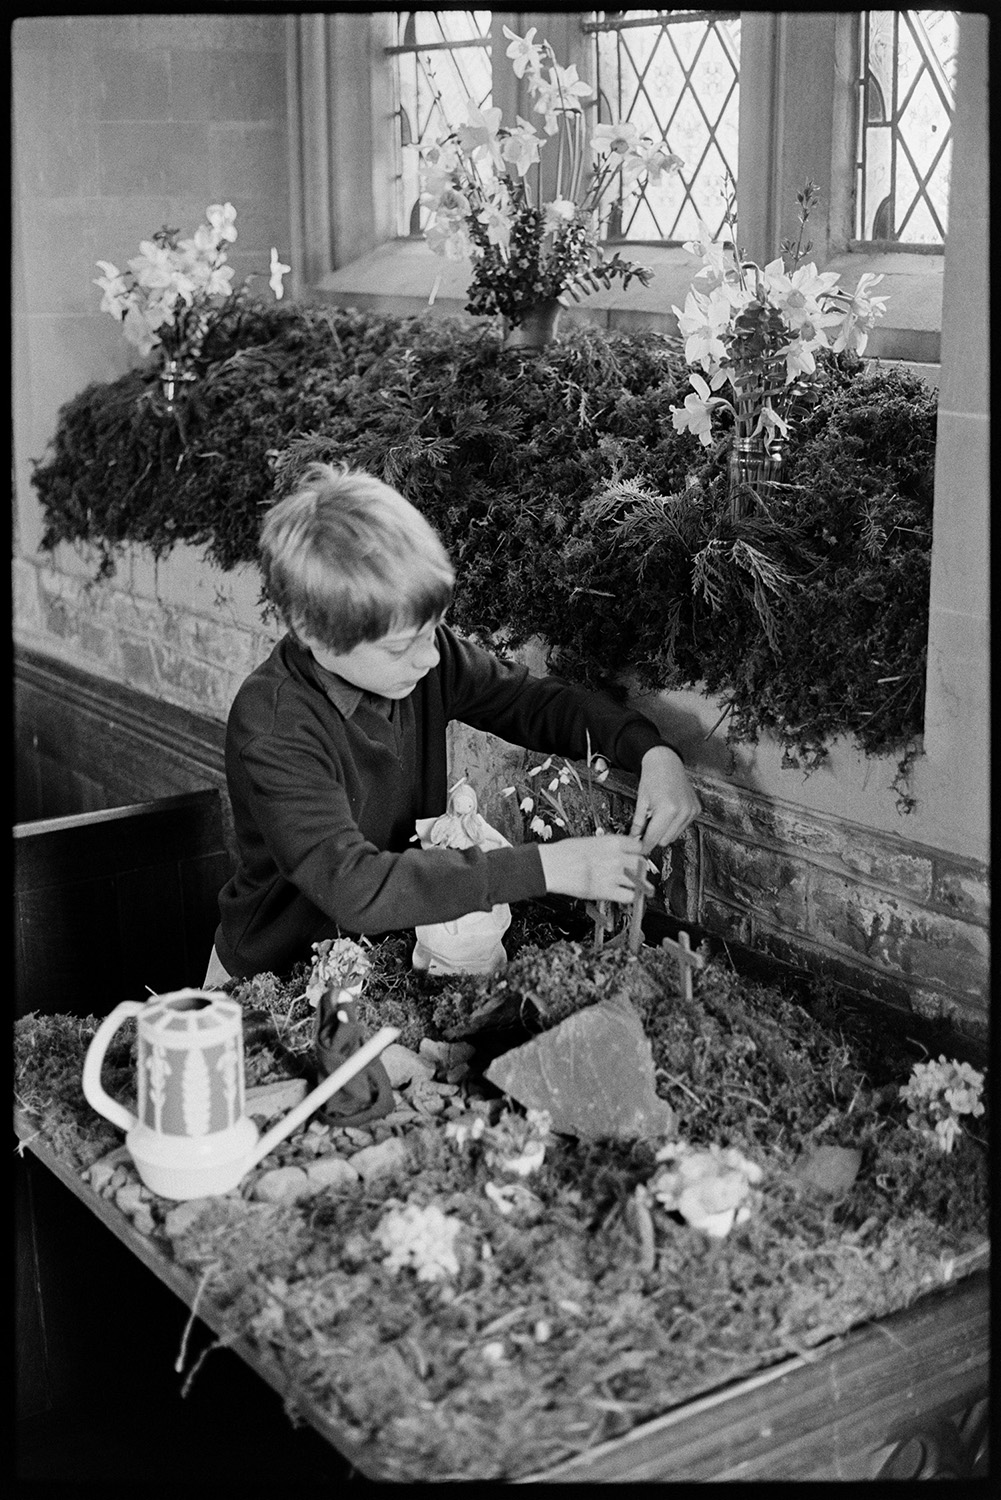 Boys arranging Church flowers. 
[A boy arranging flowers in an Easter Garden in Chittlehampton Church. A watering can is sat on the tray with the miniature garden. Another flower display can be seen in the windowsill behind him.]